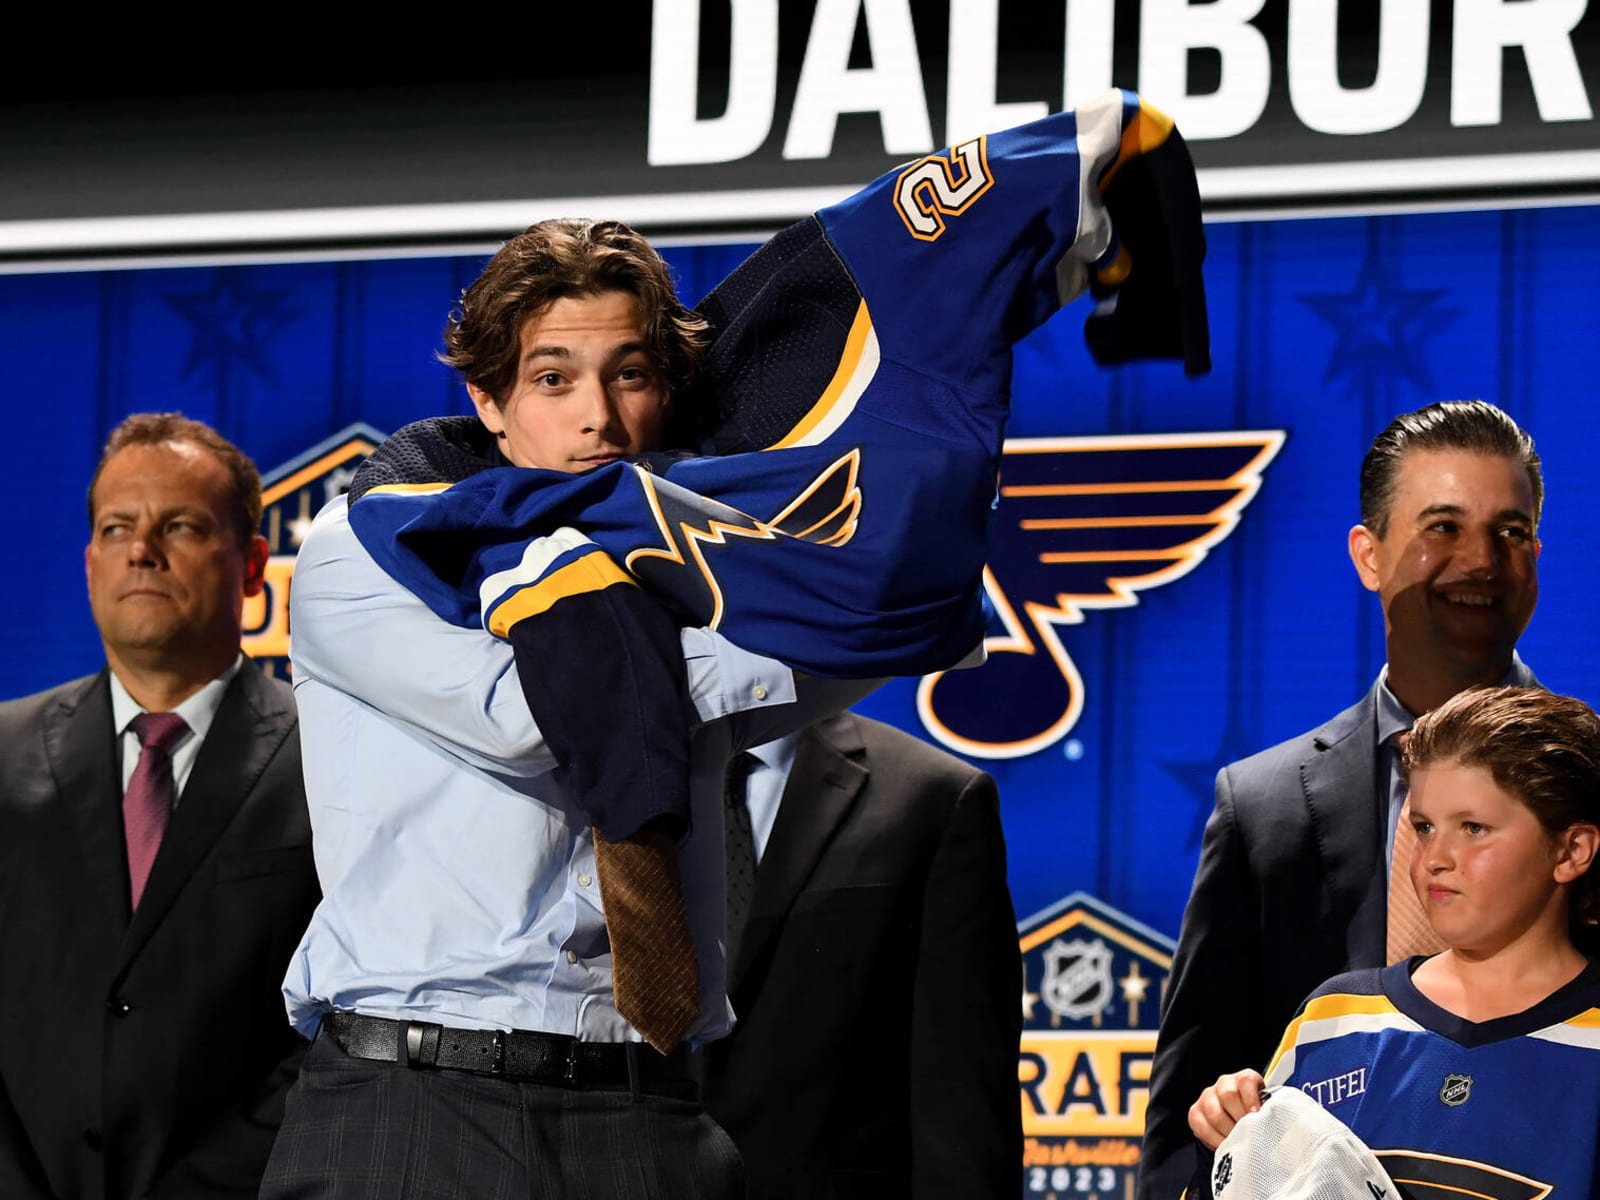 St. Louis Blues prospect Dalibor Dvorsky expected to join Sudbury